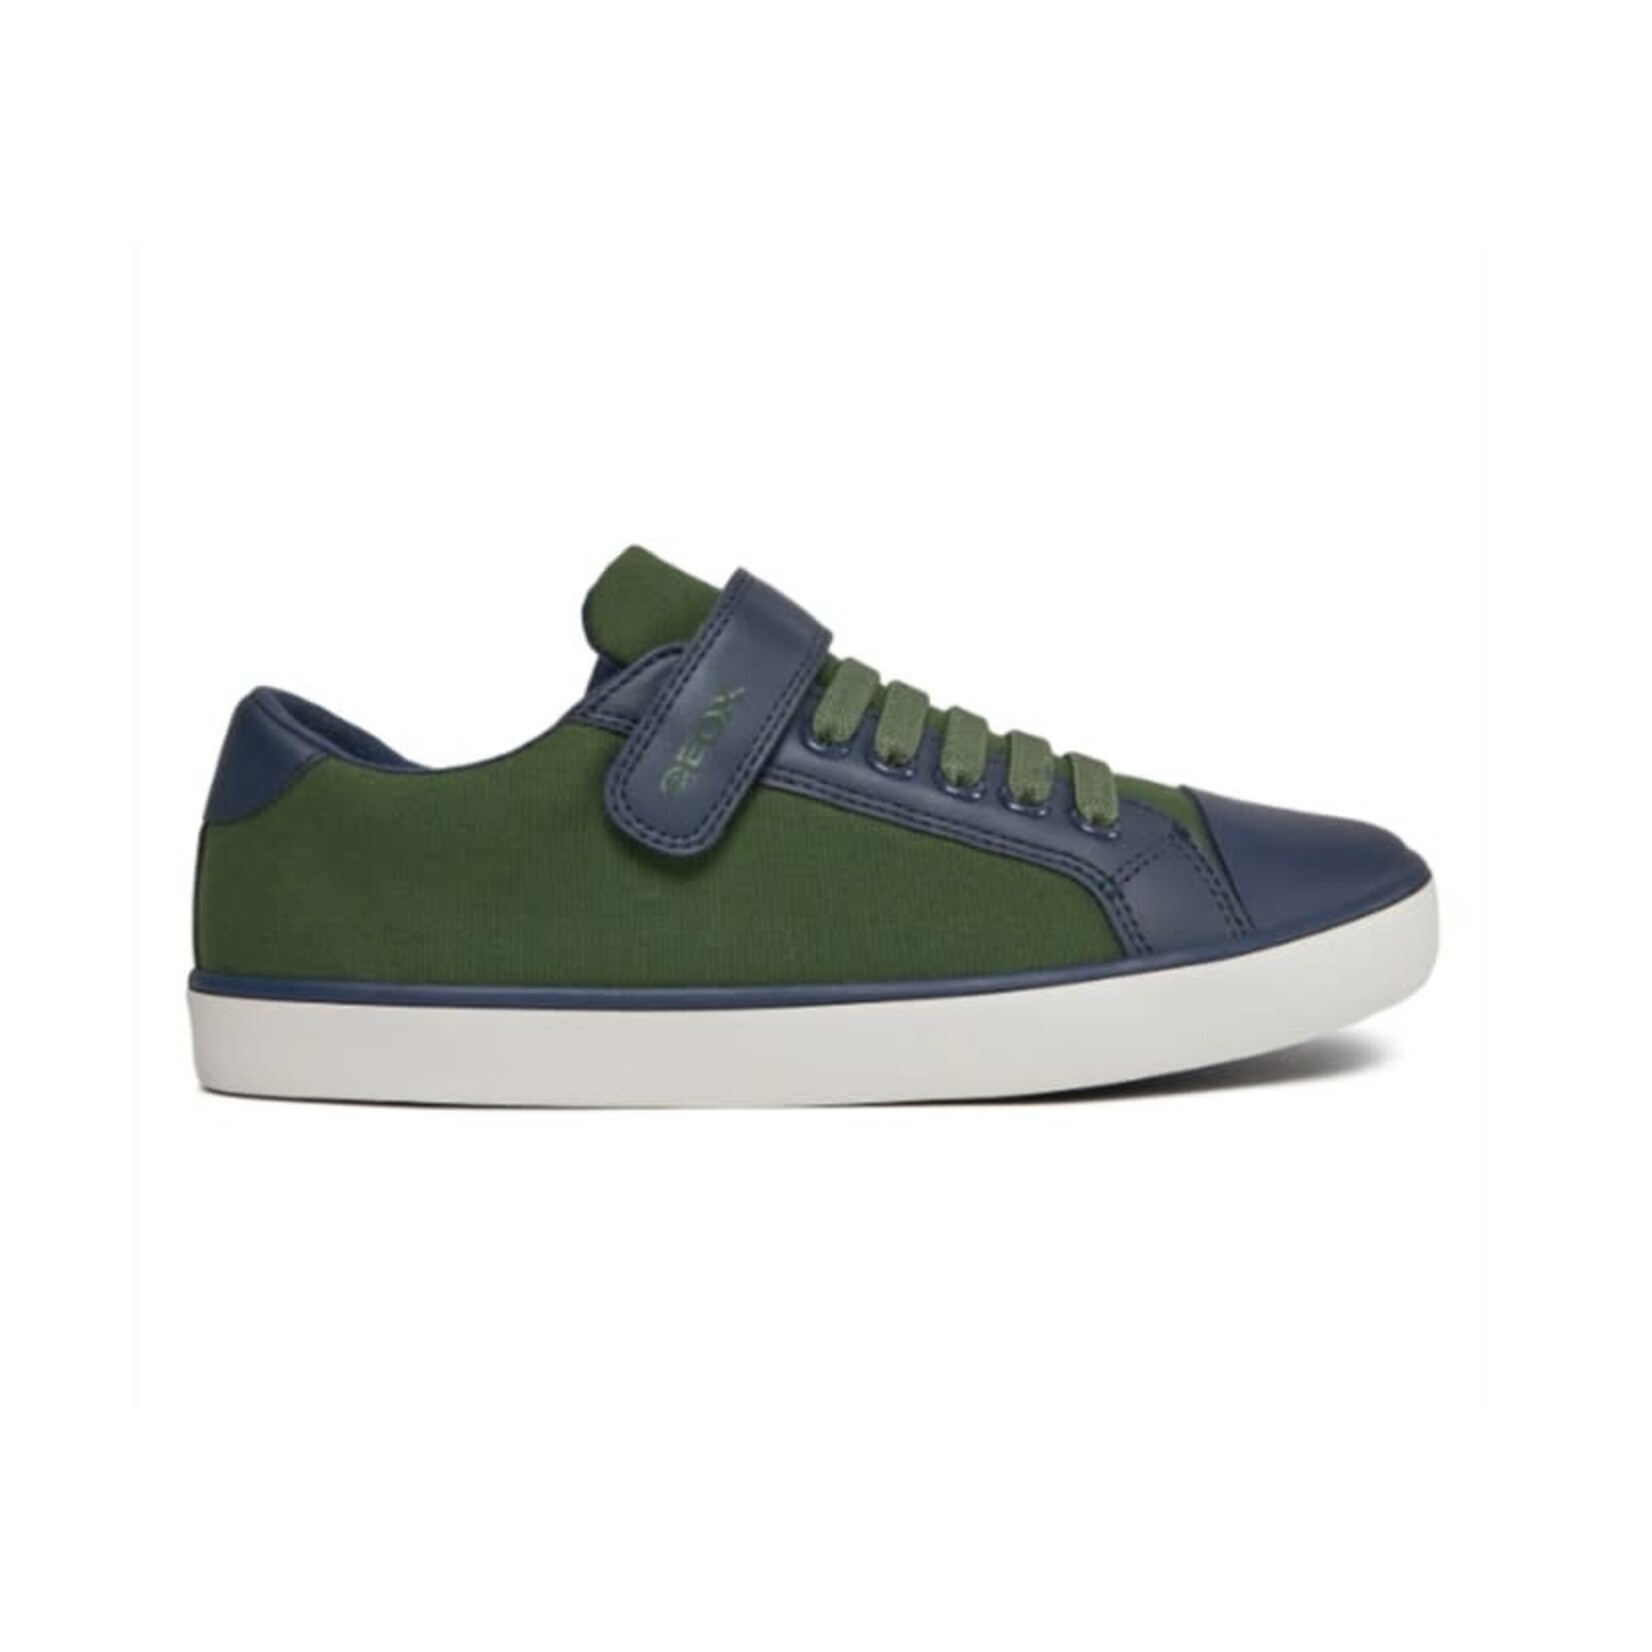 Geox GEOX - Green synthetic leather and textile sneakers 'Gisli - Navy/Green'